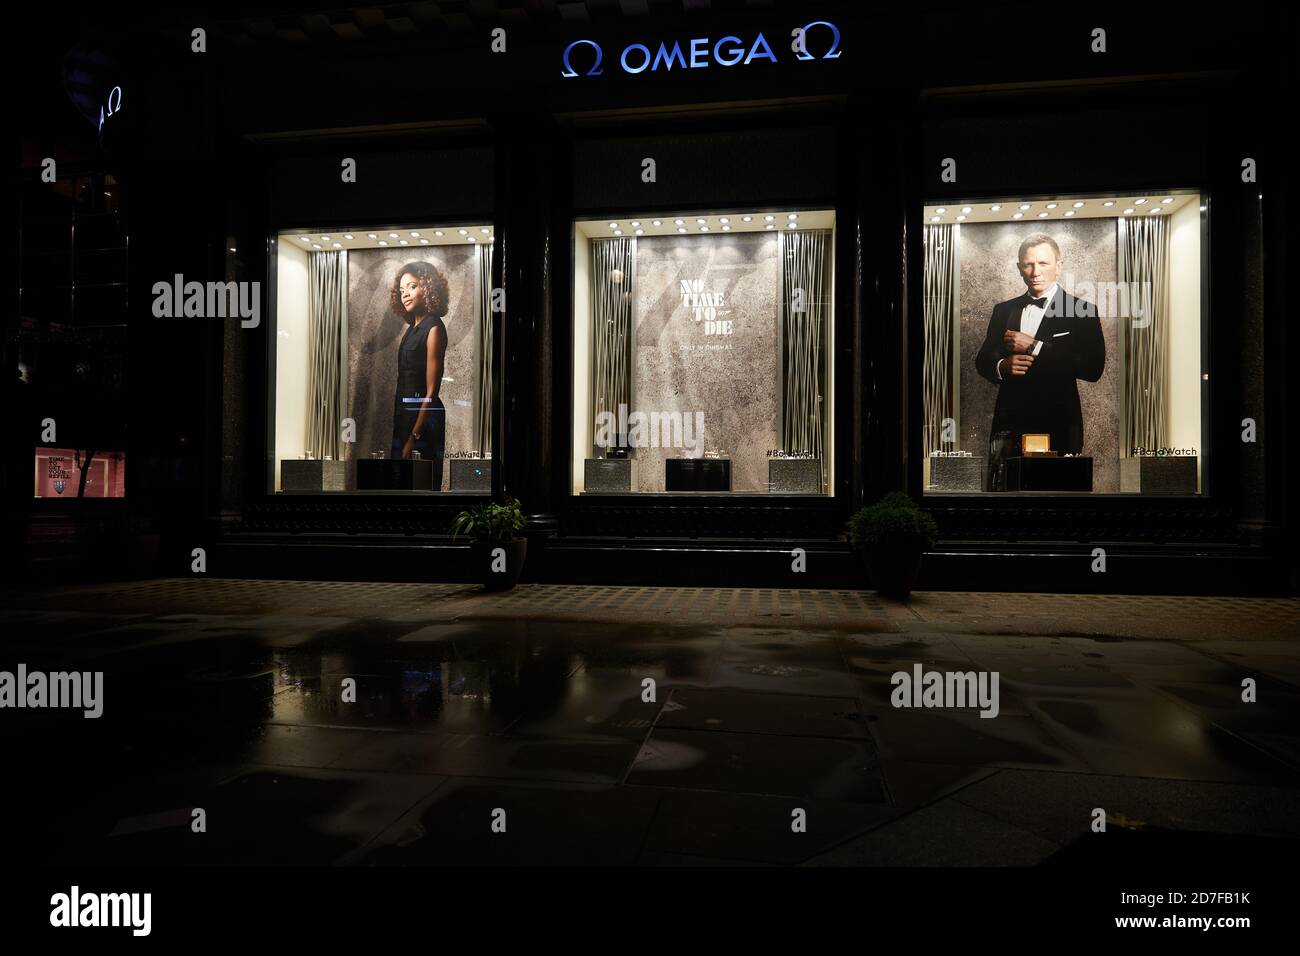 London, UK. - 14 Oct 2020: The Omega store Oxford Street displays the brands commercial links with the James Bond A Time To Die film, put up before the films release date was delayed for a second time because of the coronavirus pandemic. Stock Photo